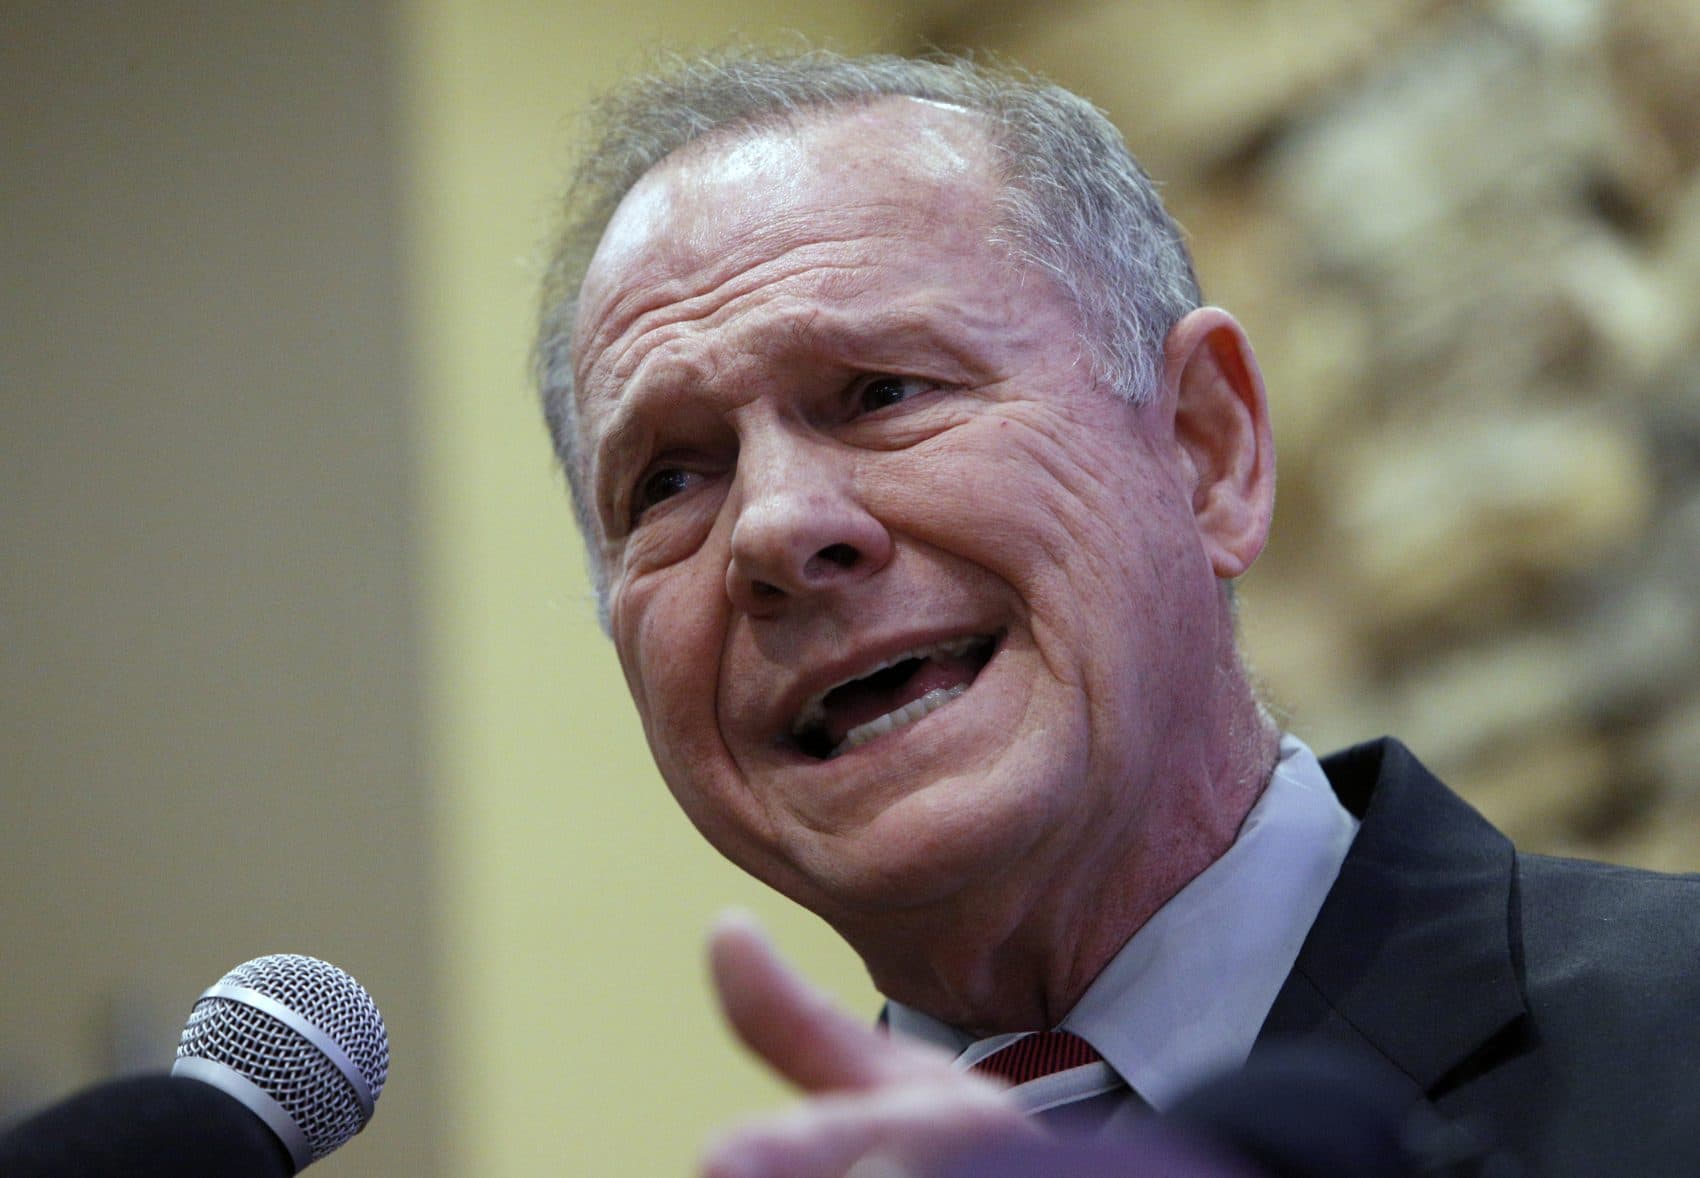 How Alabama Is Responding To Allegations Against Roy Moore | Here & Now